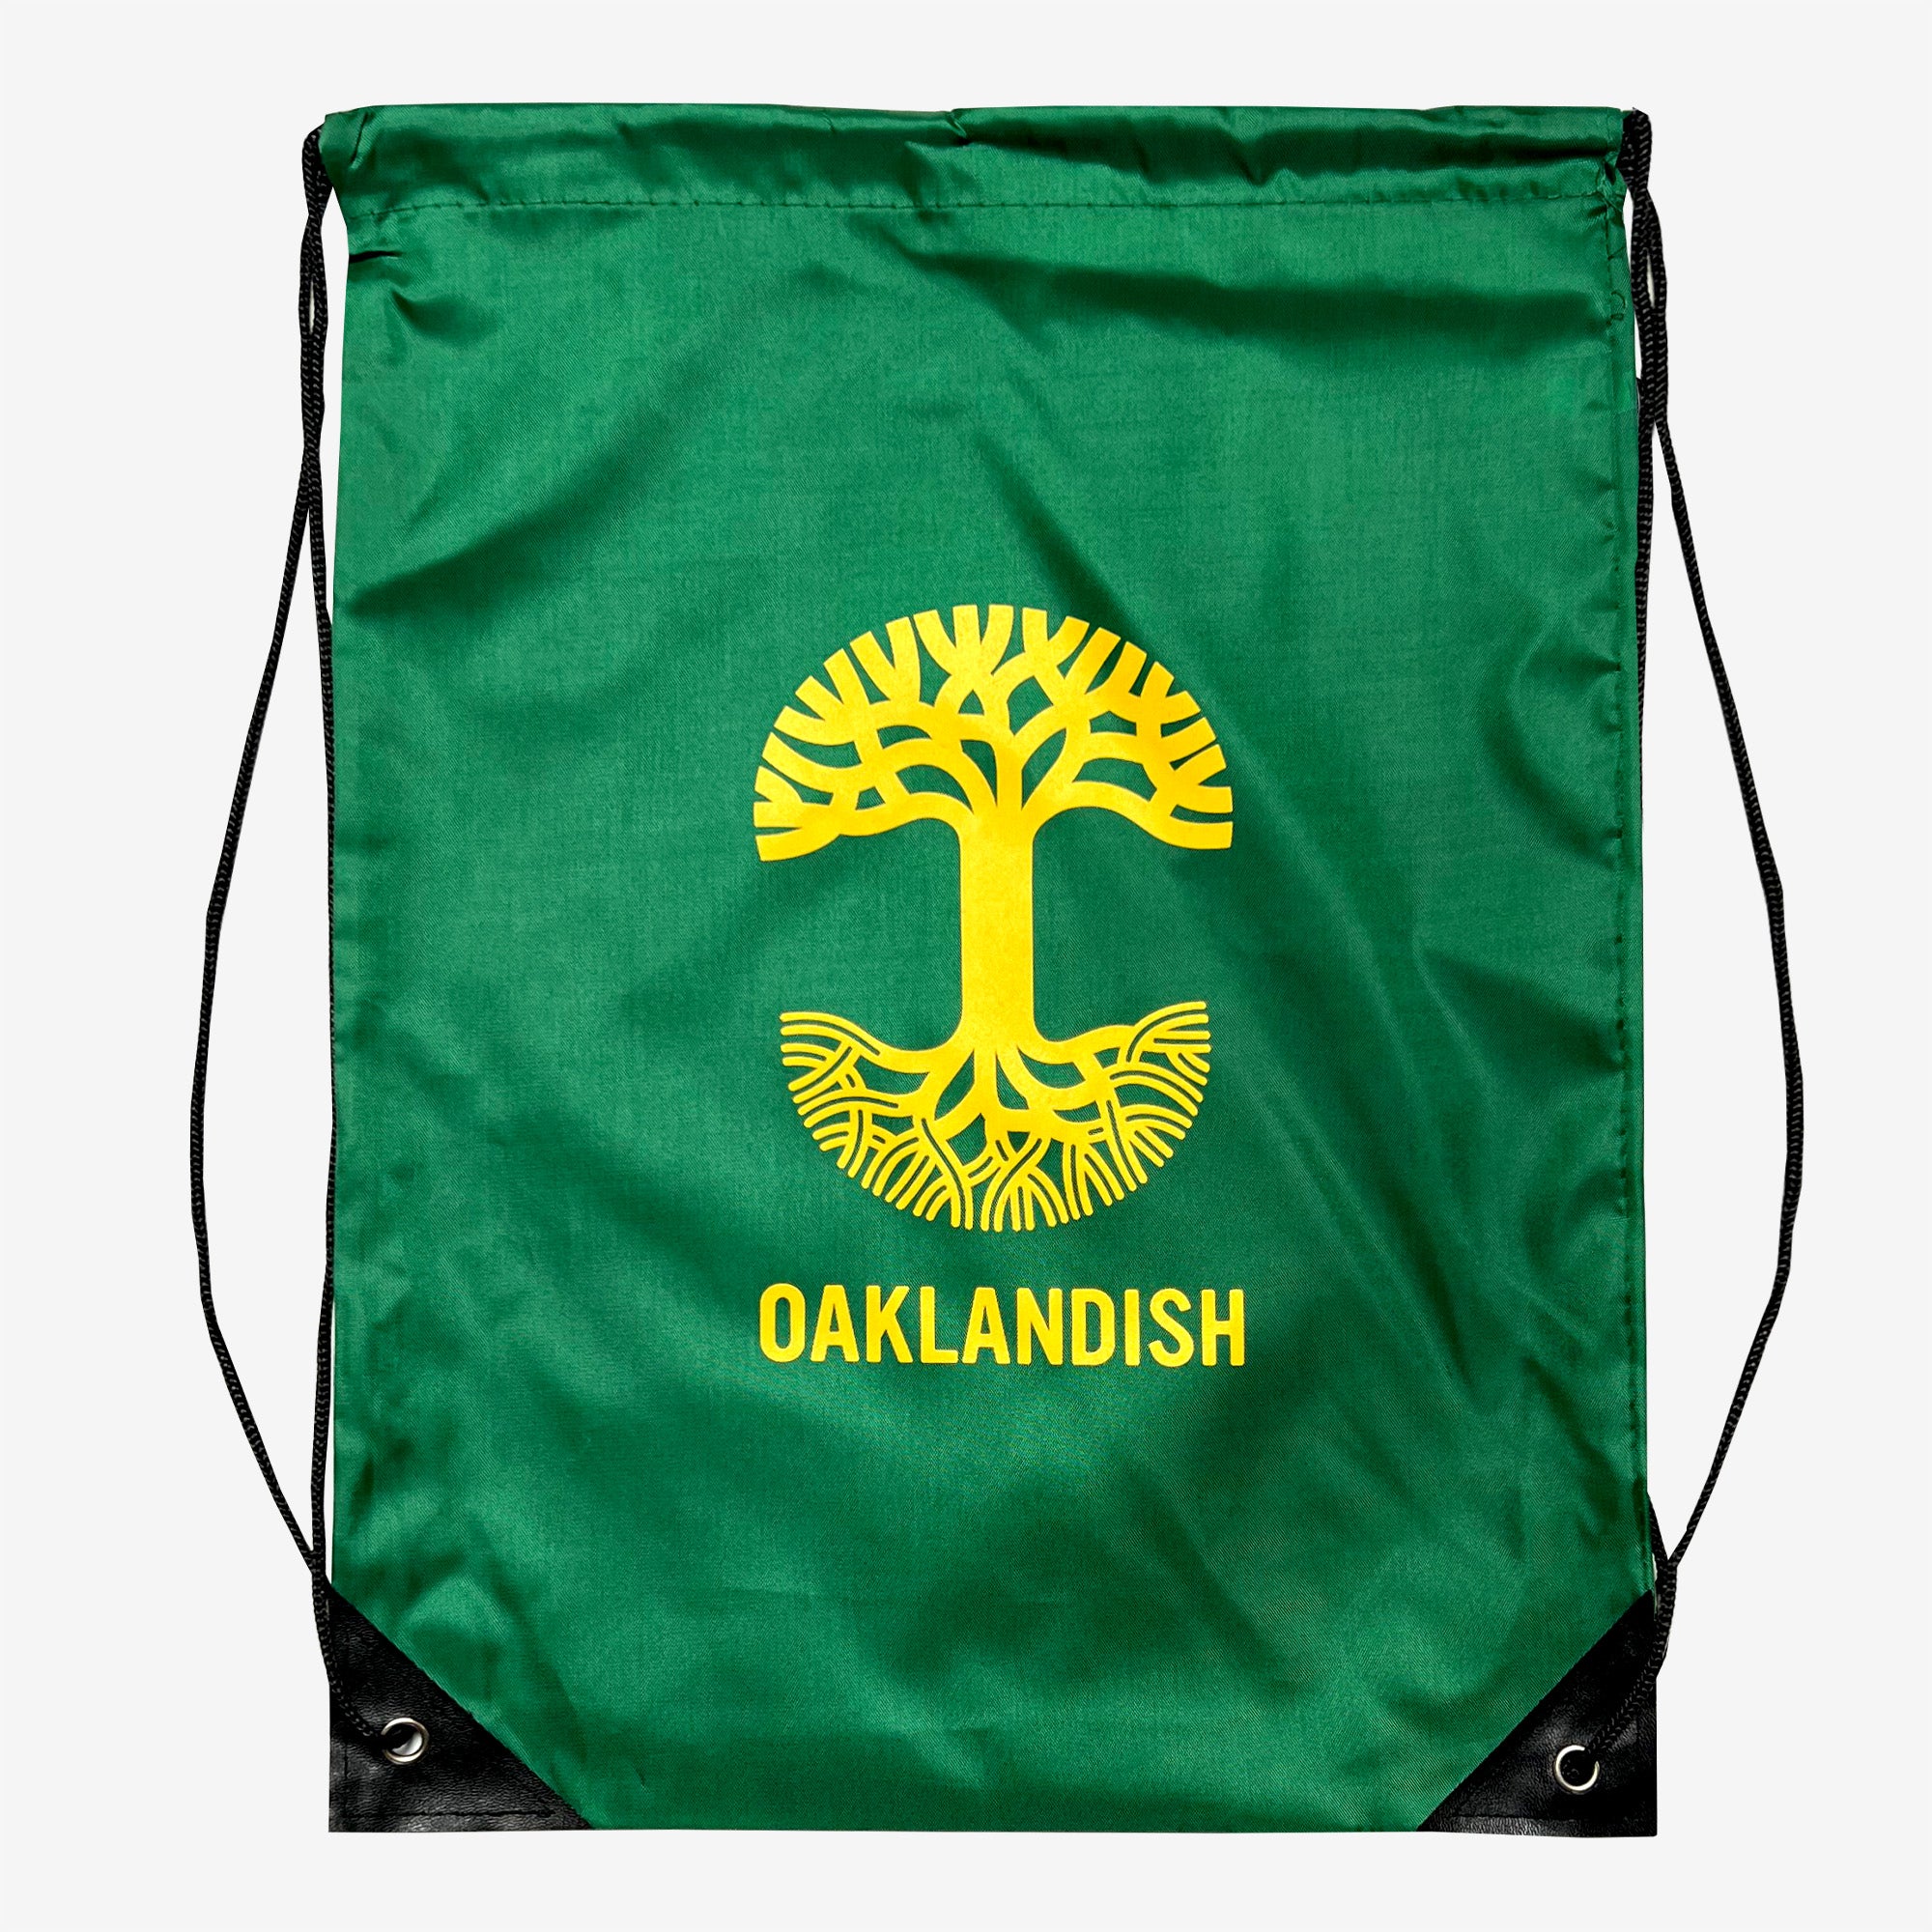 Flat image of forest drawstring bag with yellow Oaklandish logo imprinted on front.